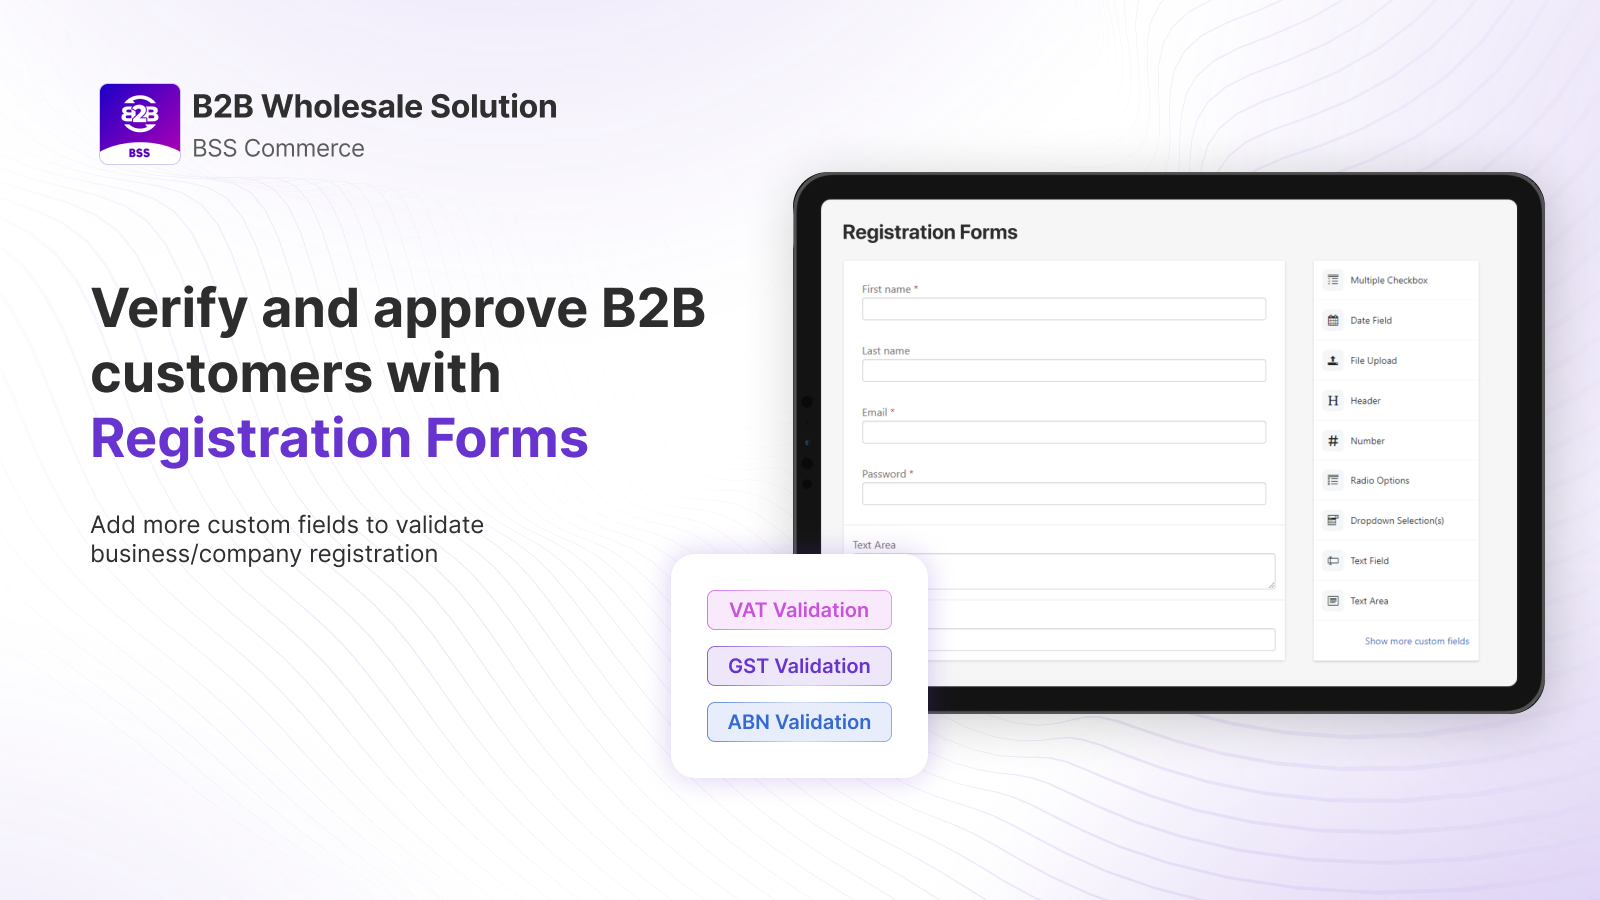 Registration Form for B2B Customers - Review Before Apporving